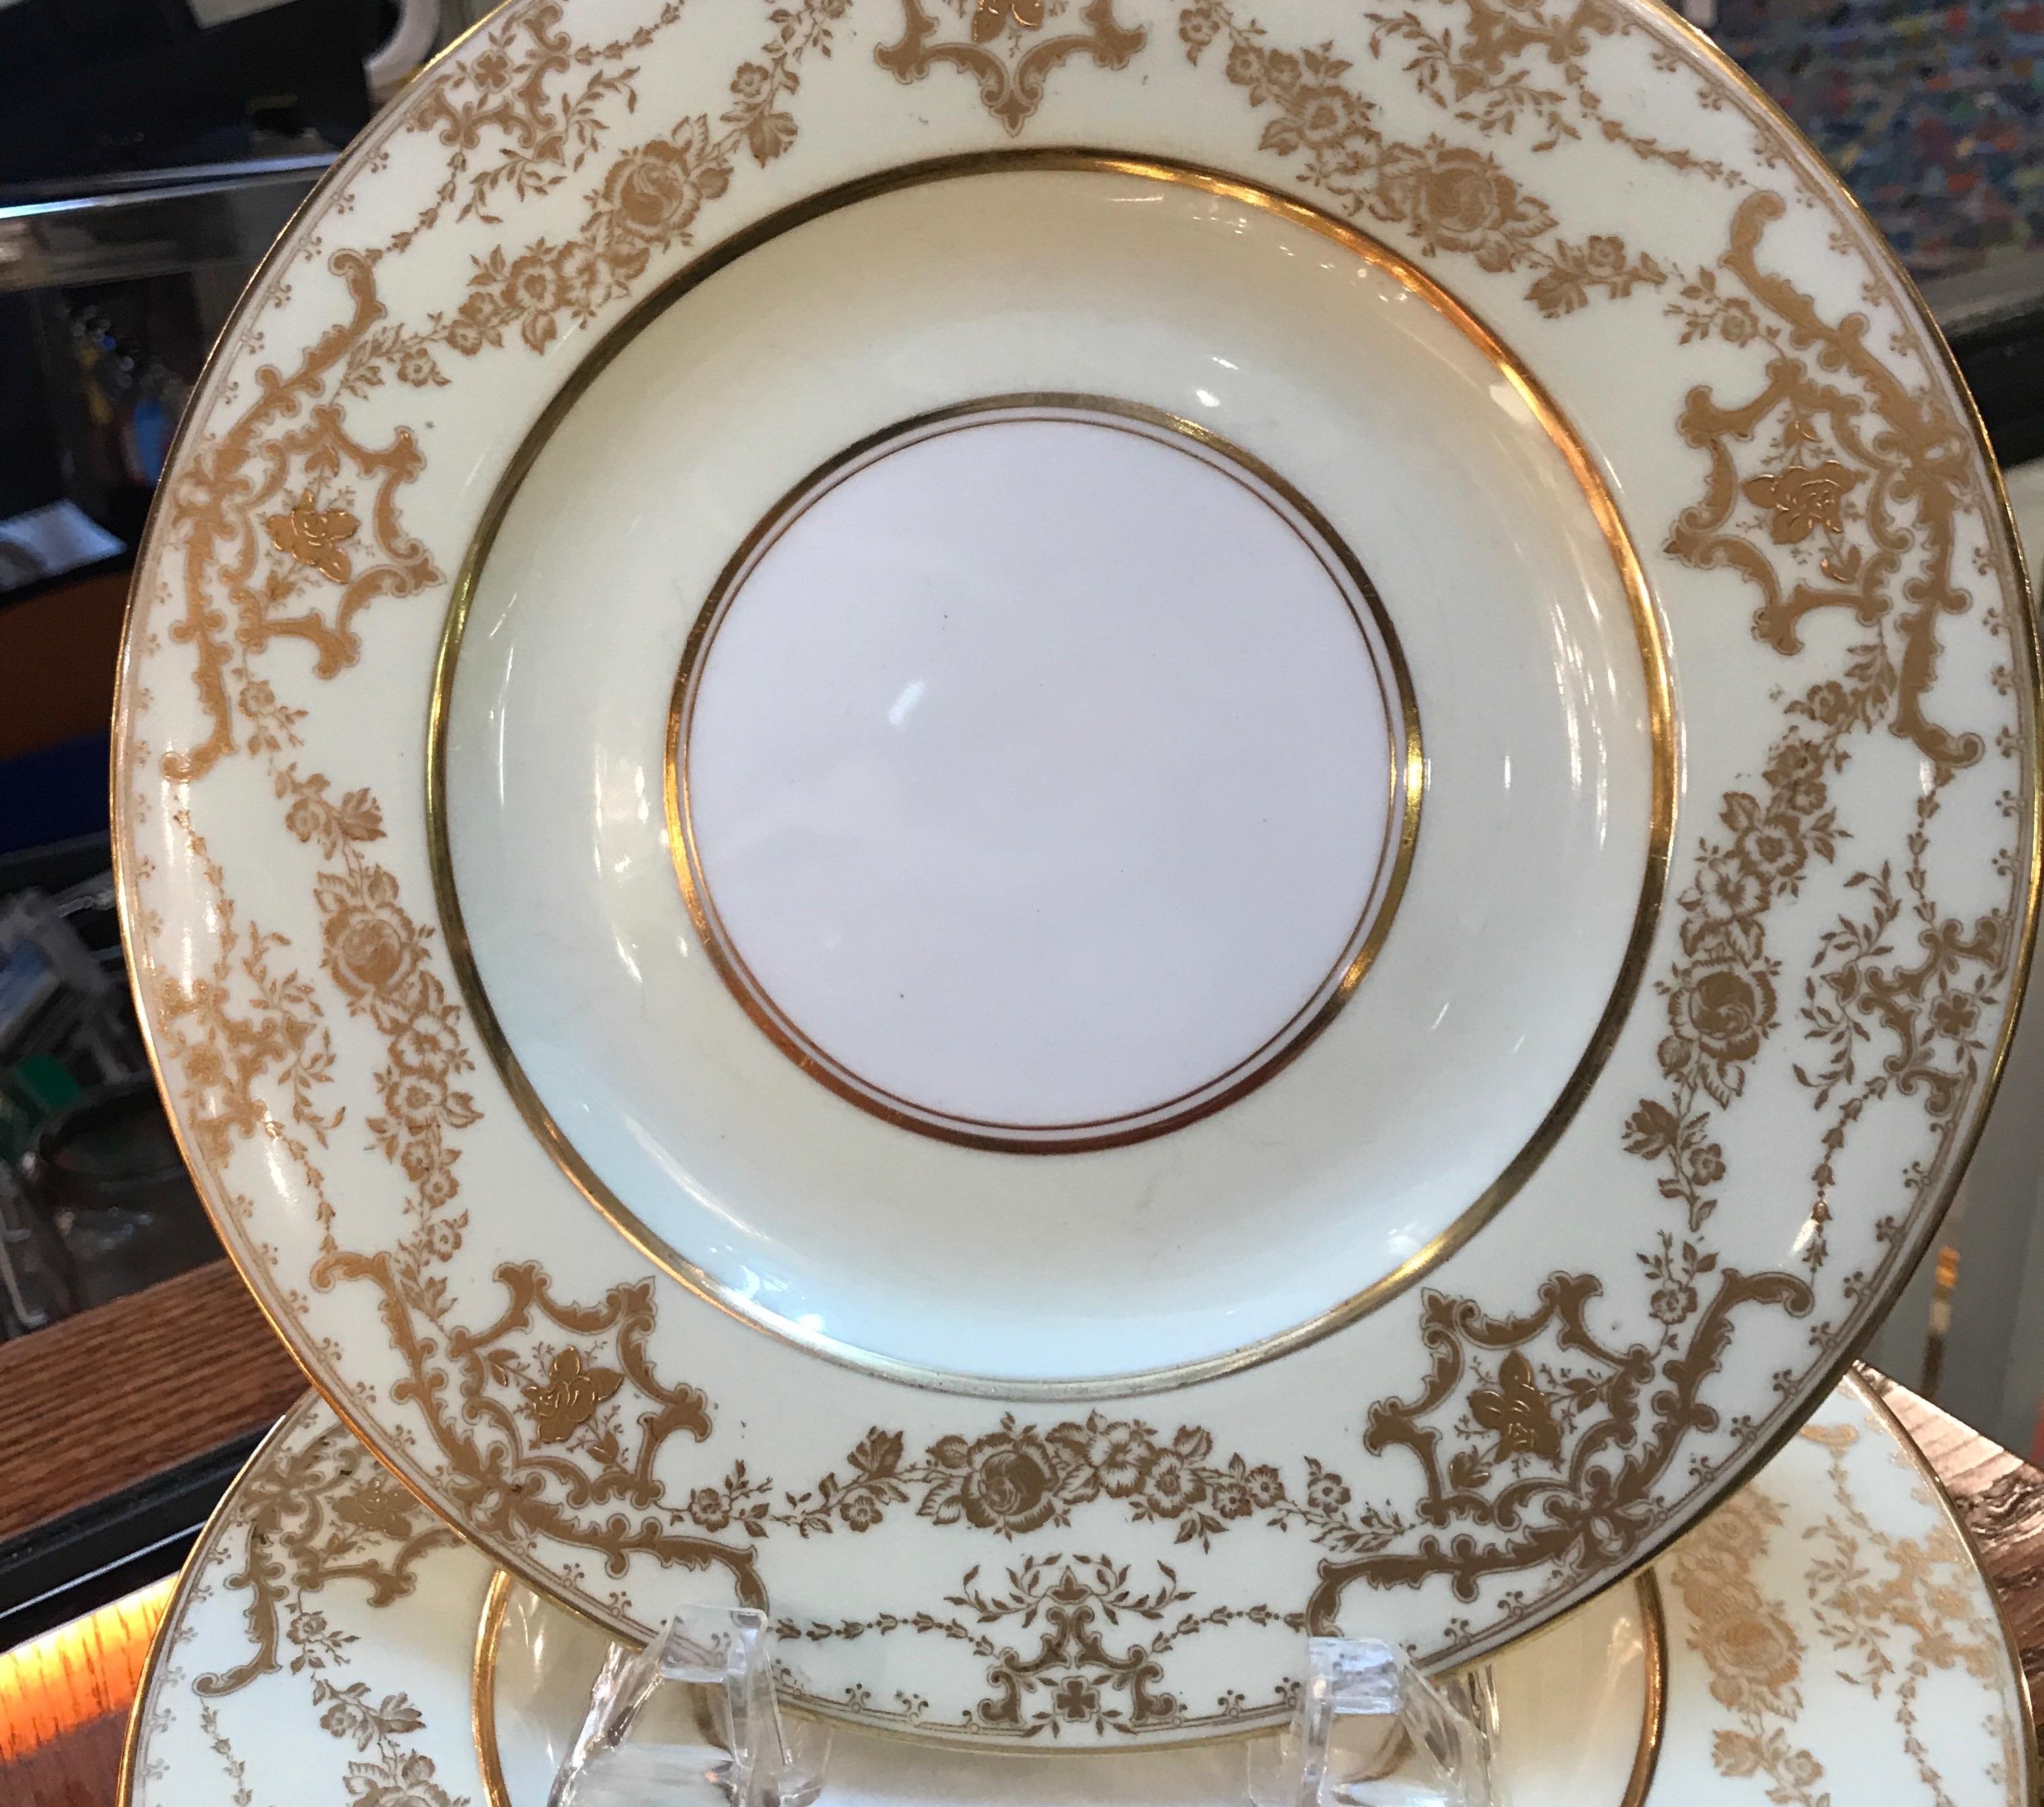 Elegant set of 10 gilt bordered luncheon dessert plates by George Jones, England. Elegant borders with a vanilla background with gilt bands and floral swags. Retailed by Davis Collamore NYC. 9